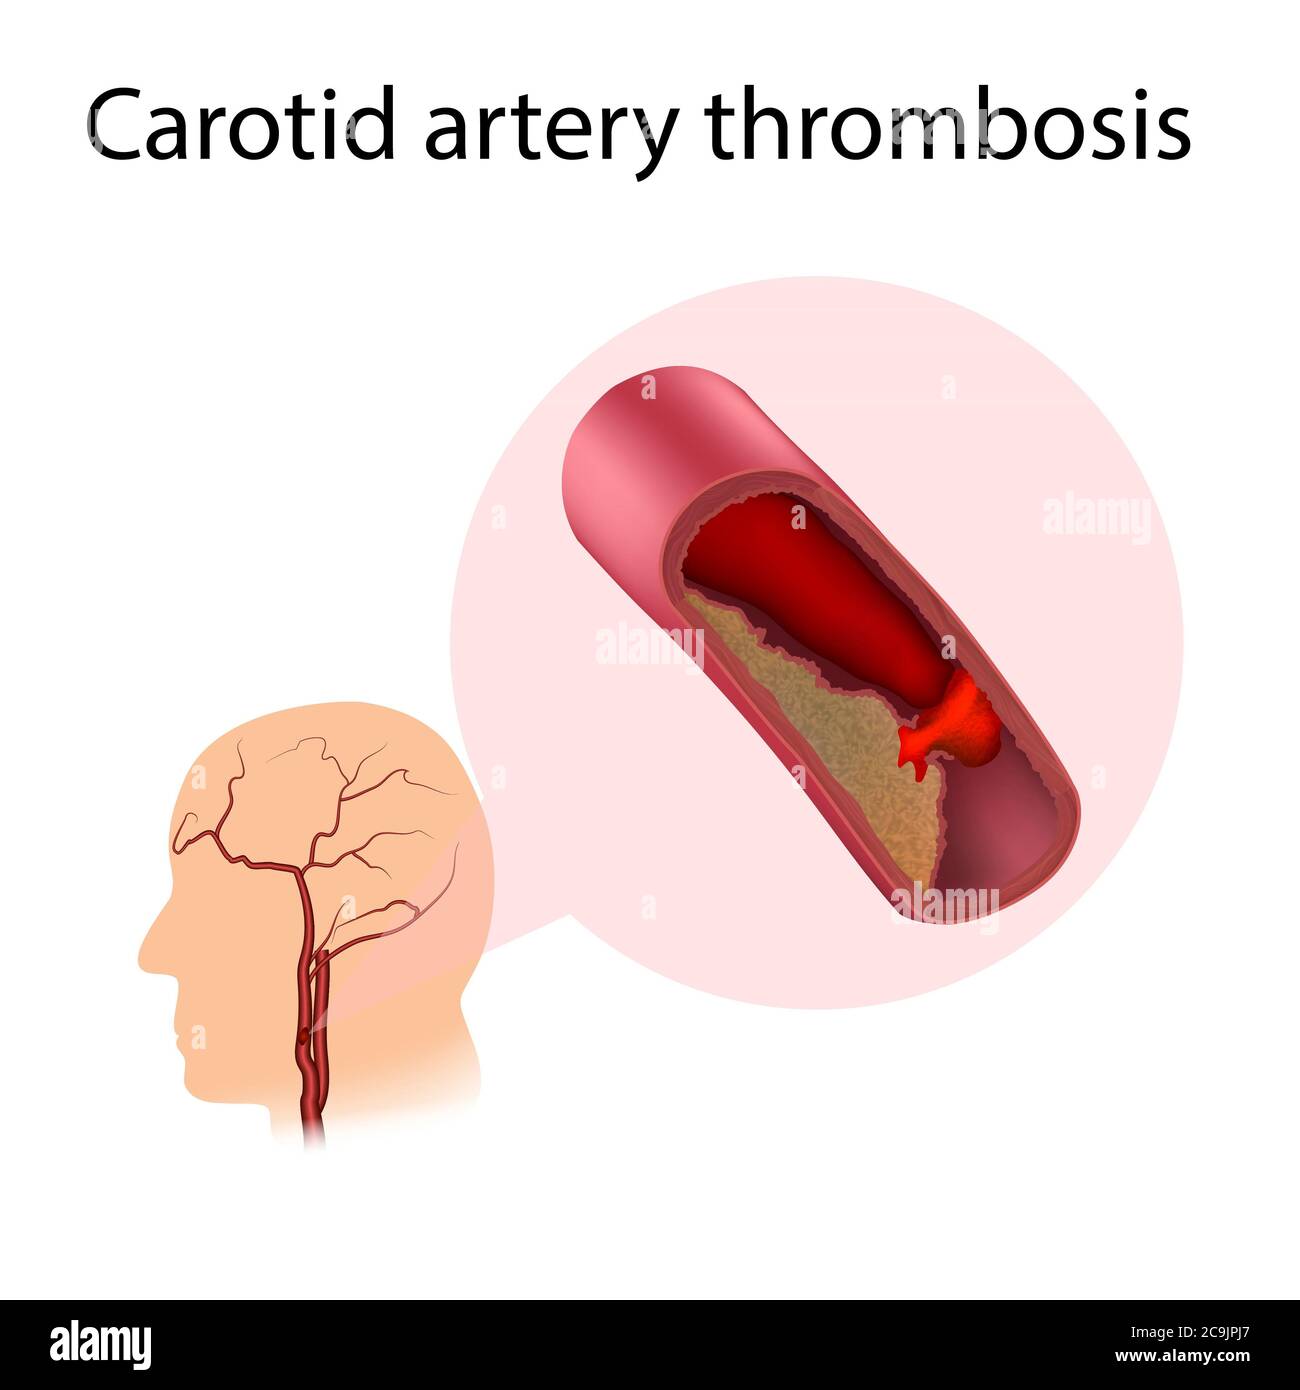 Carotid artery thrombosis, illustration. A blood clot is blocking the blood vessel. Stock Photo